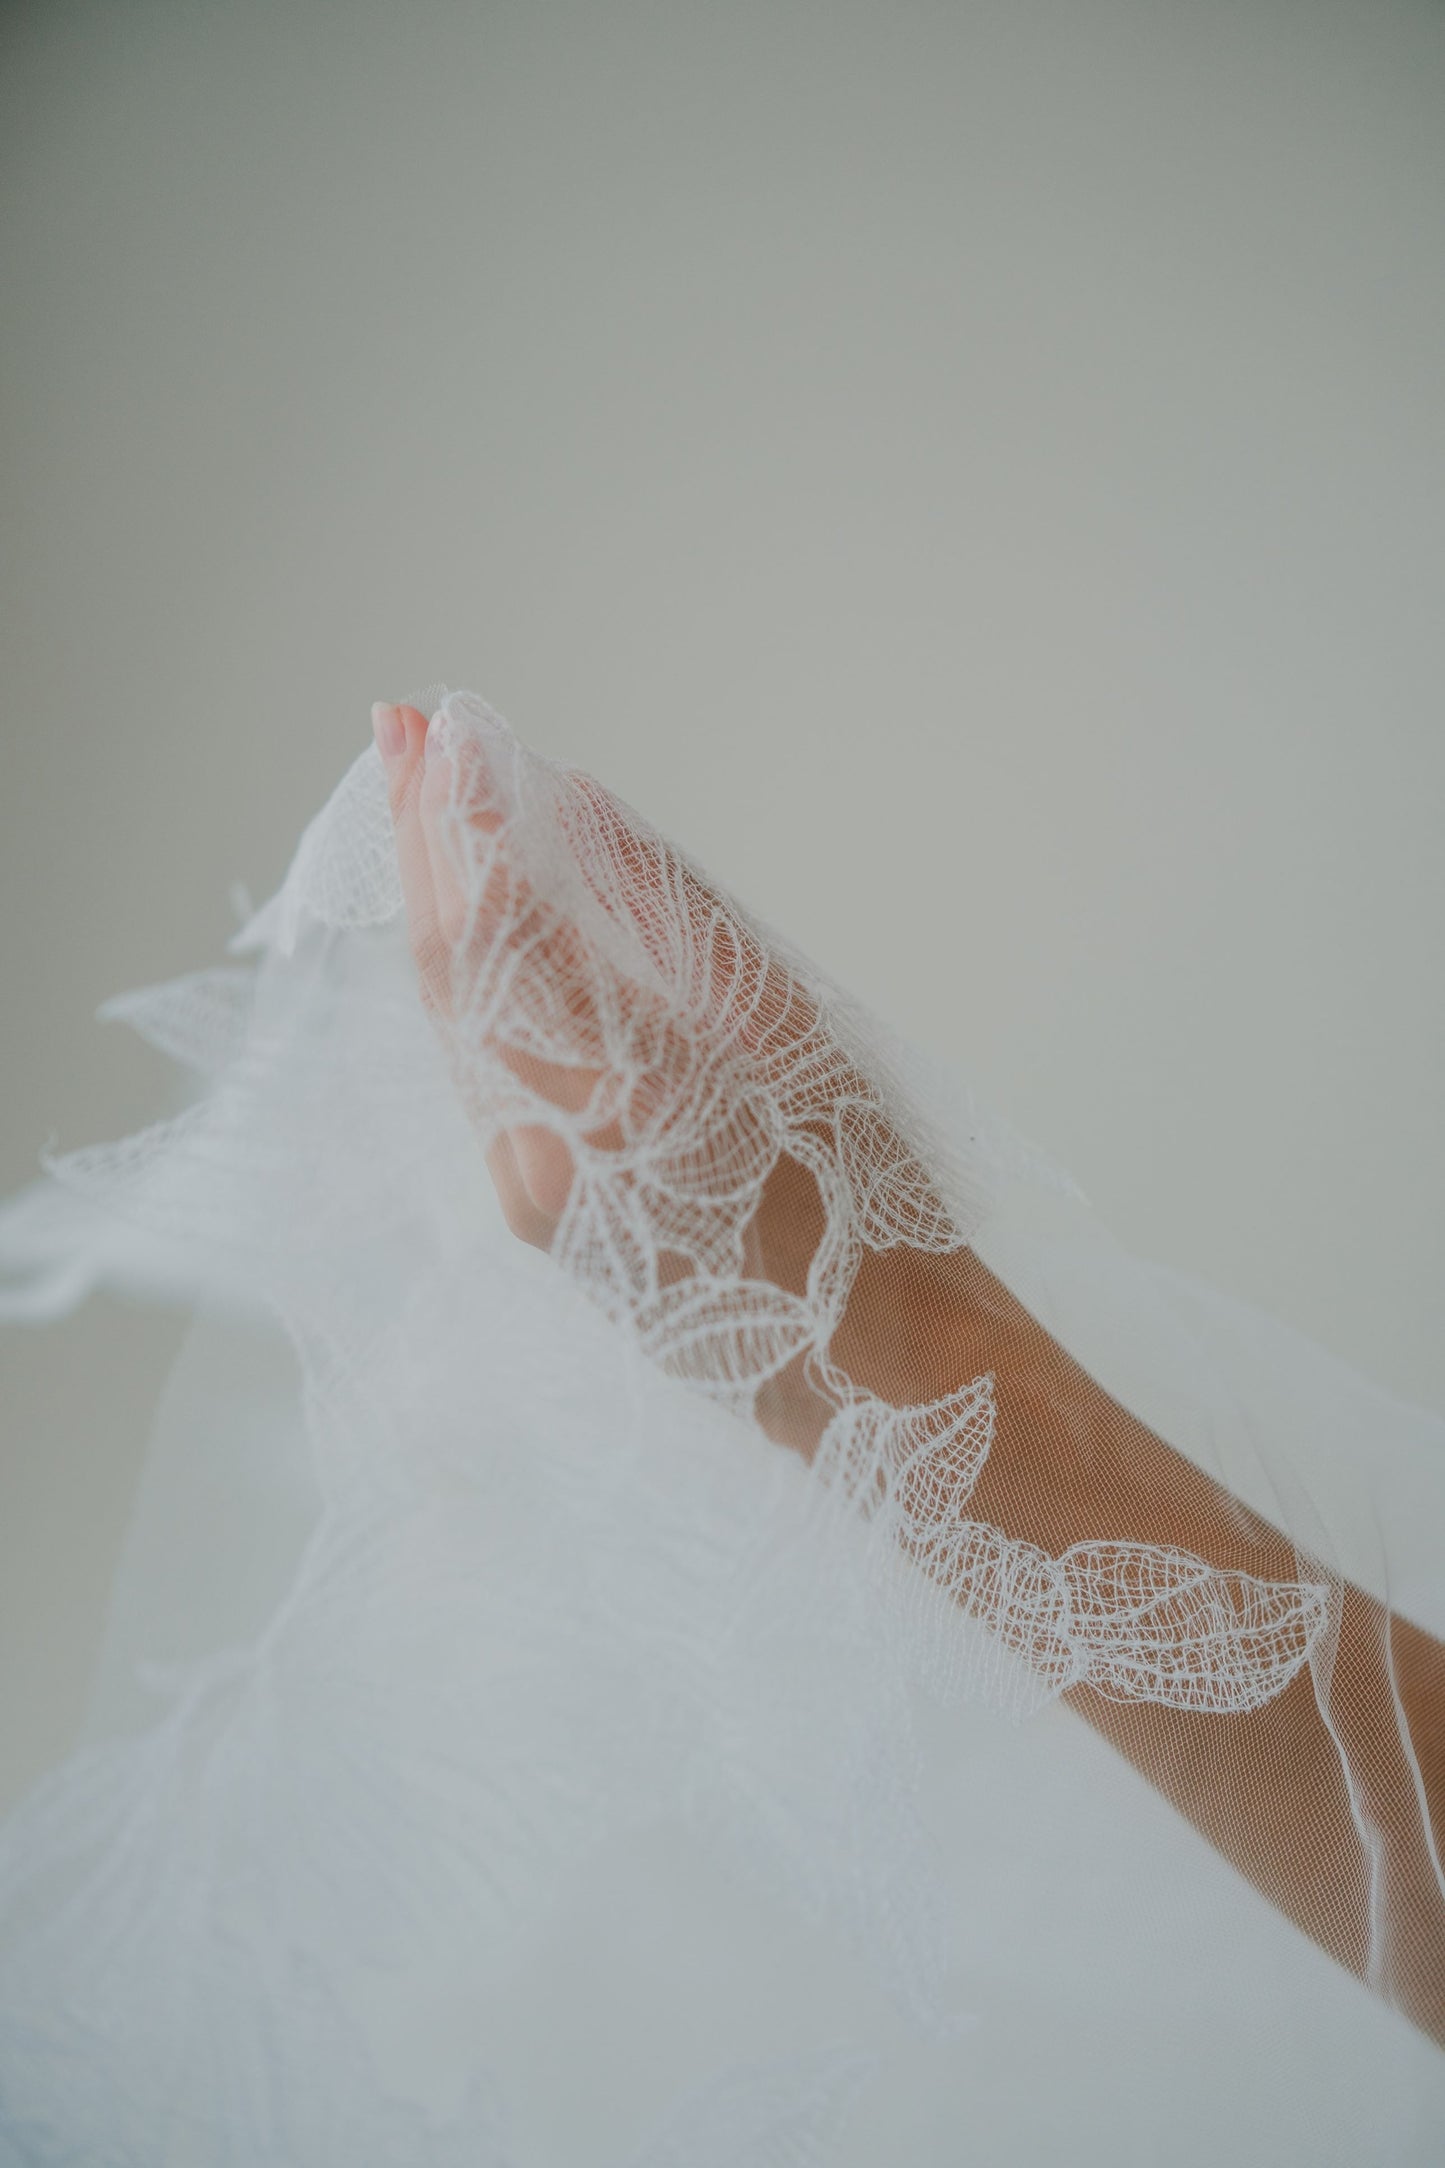 Everdeen Floral Edge Embroidery Tulle Cathedral Veil | Bone & Grey Bridal Accessories